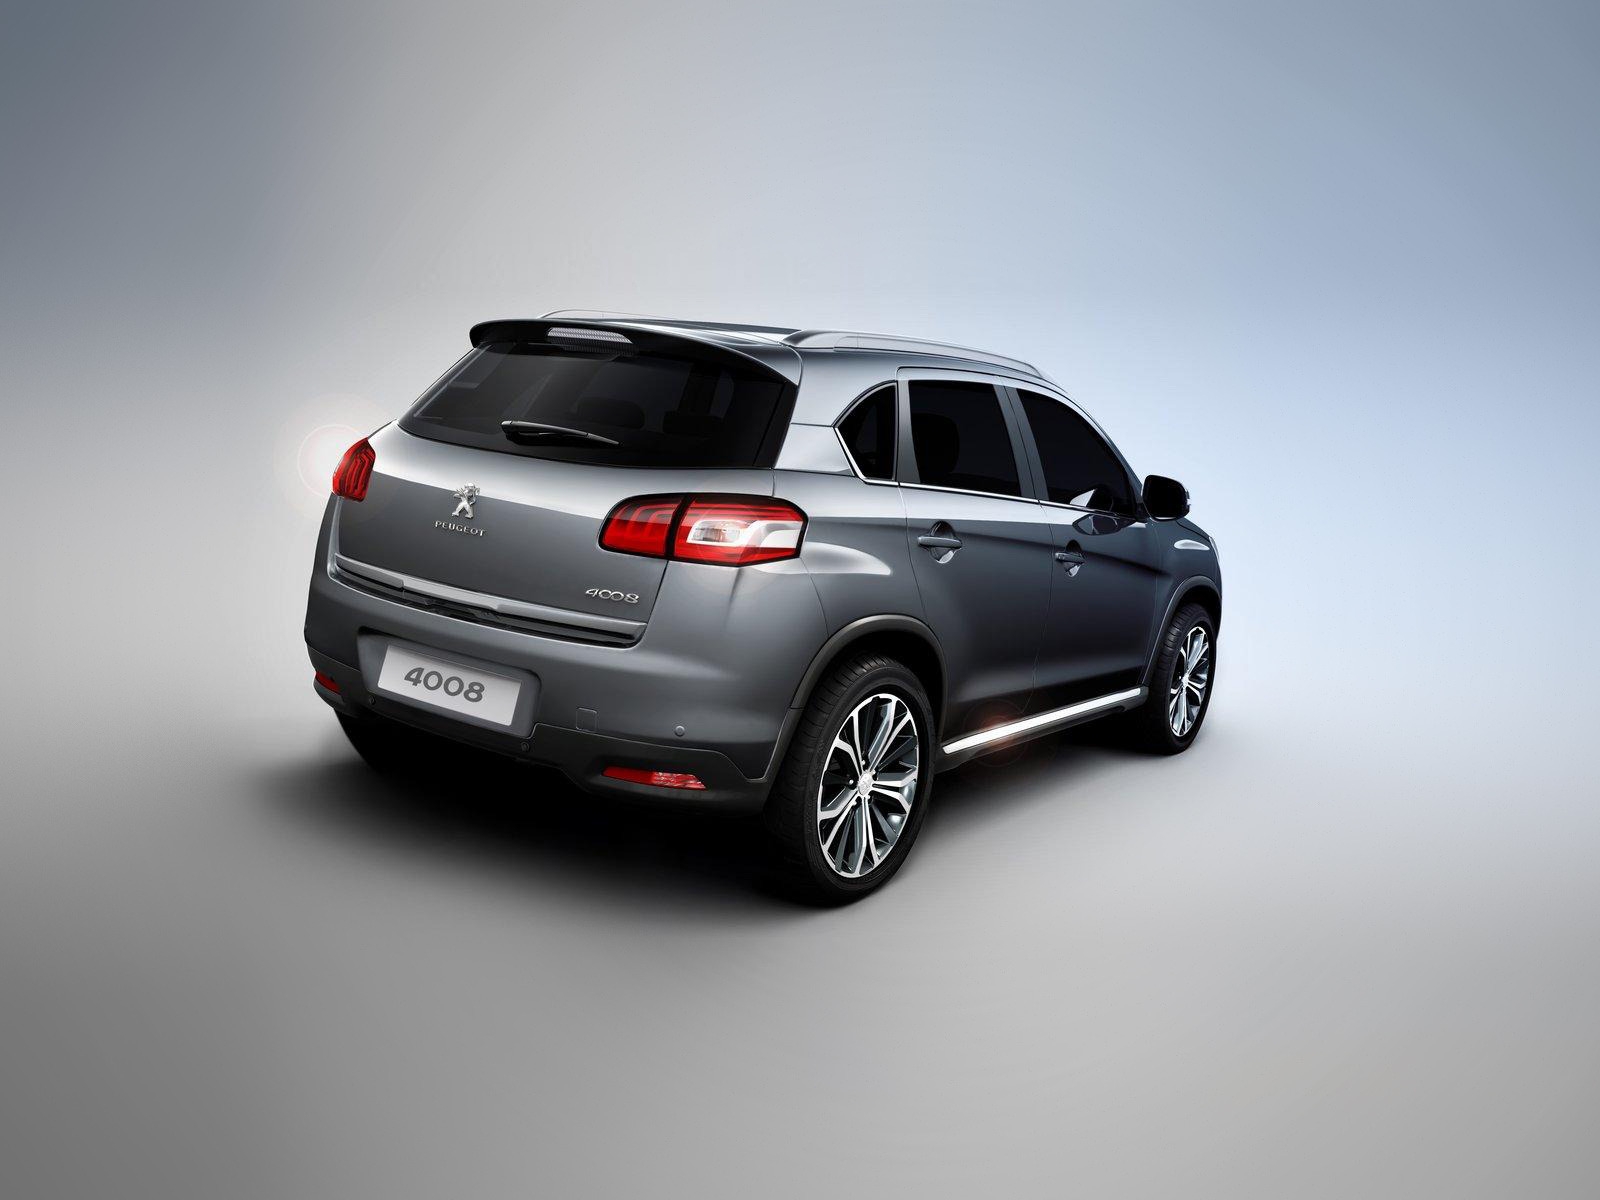 2012 Peugeot 4008 Rear for 1600 x 1200 resolution